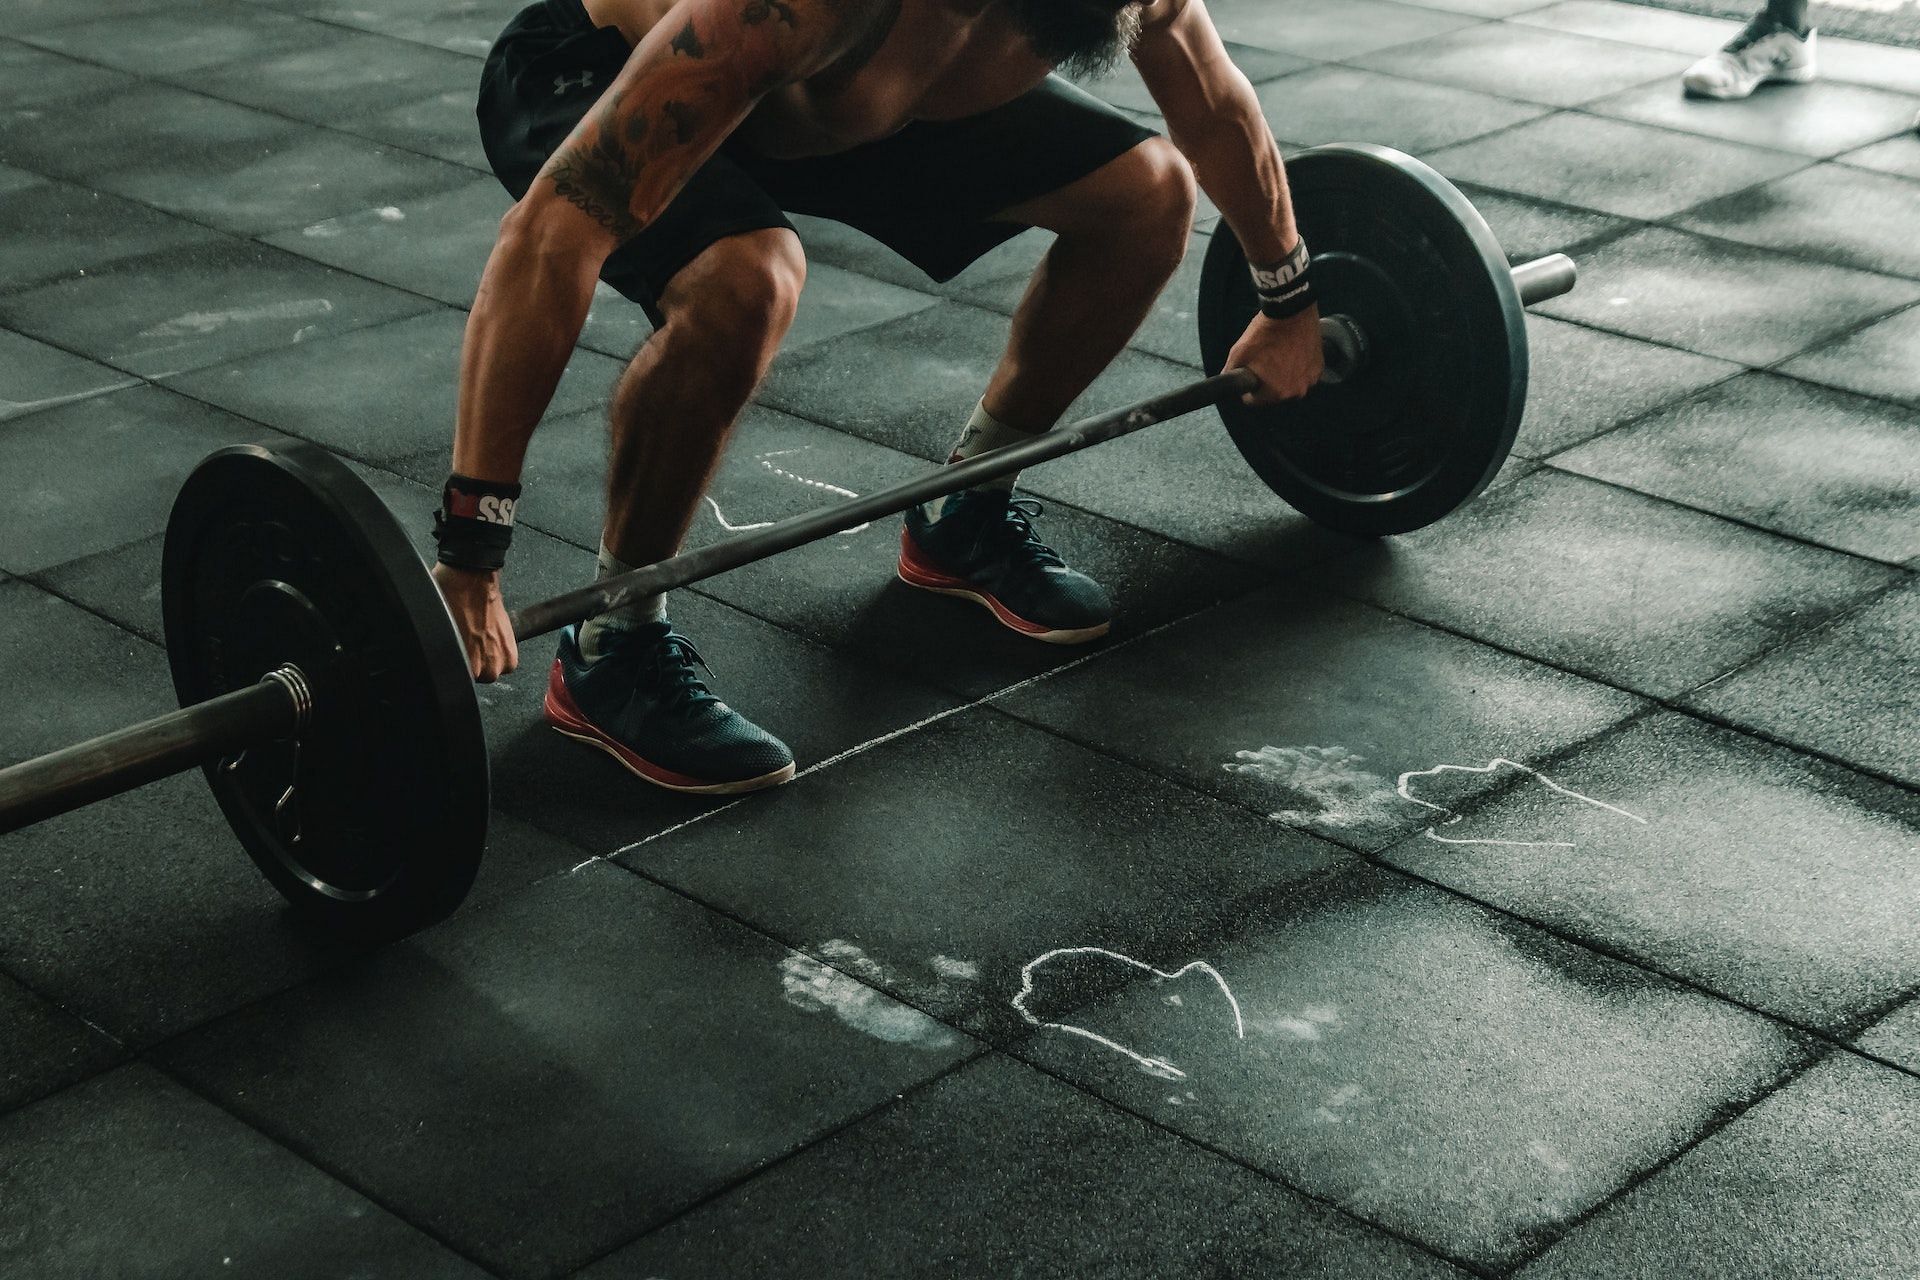 It targets major muscles in the lower and upper body. (Photo via Pexels/Victor Freitas)